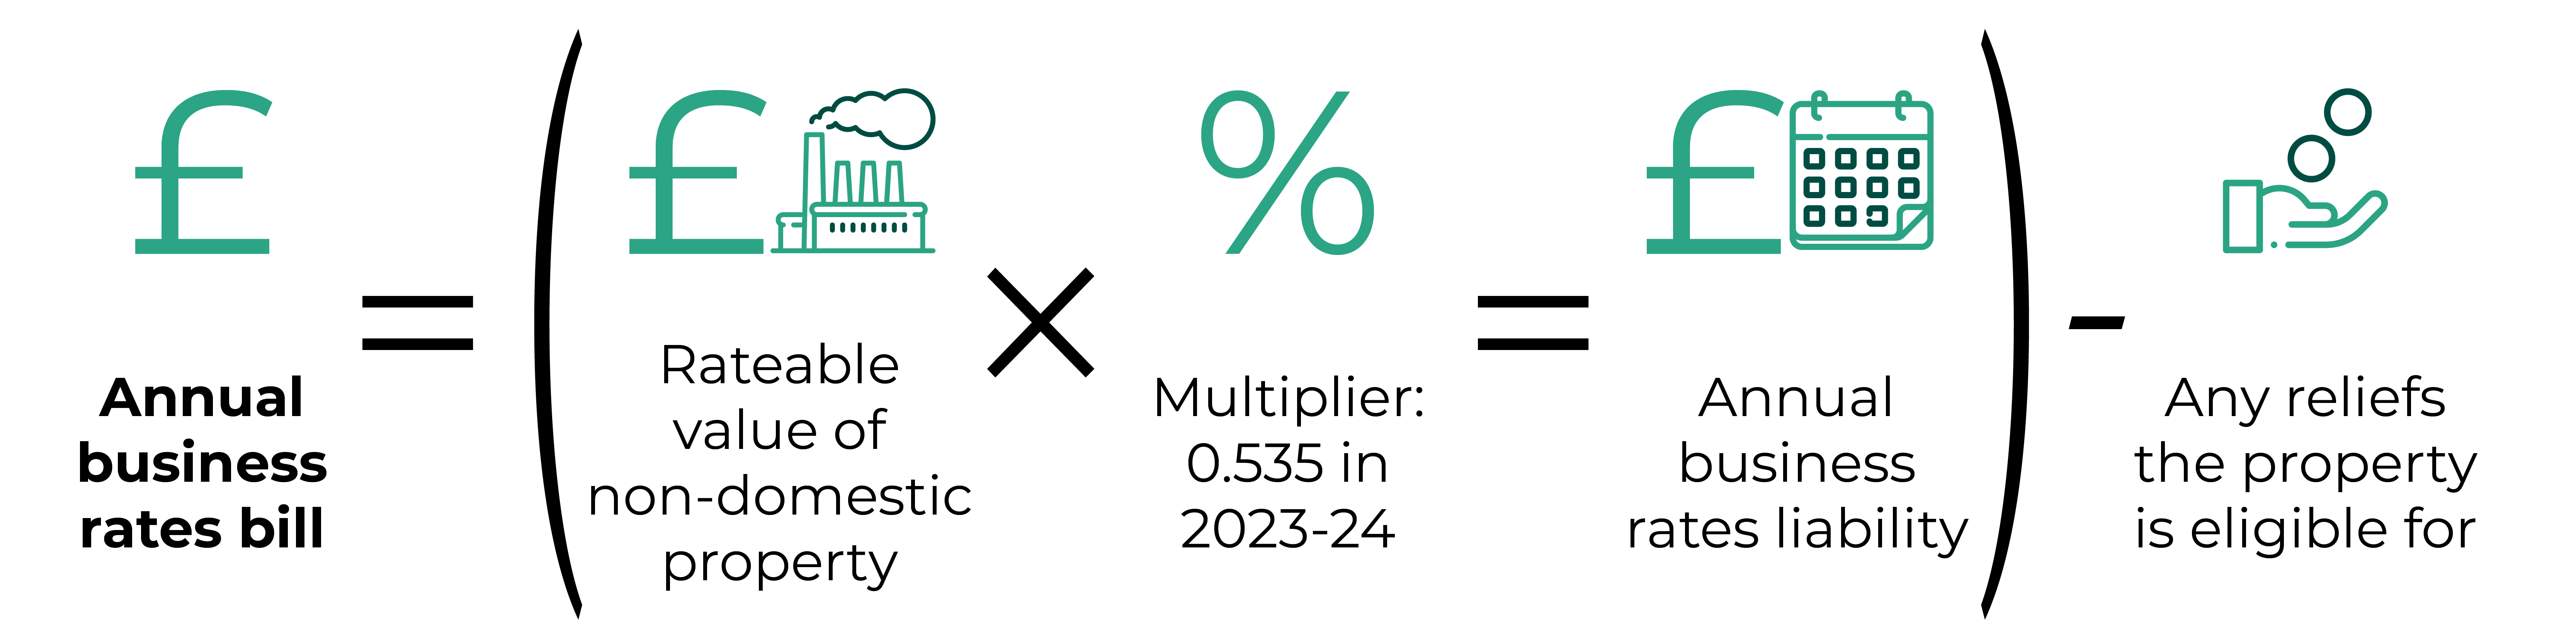 A graphic showing how the annual business rates bill is calculated. The rateable value is multiplied by the multiplier, which is 0.535 in 2023-24 to give the annual business rates liability, from which any reliefs are deducted.